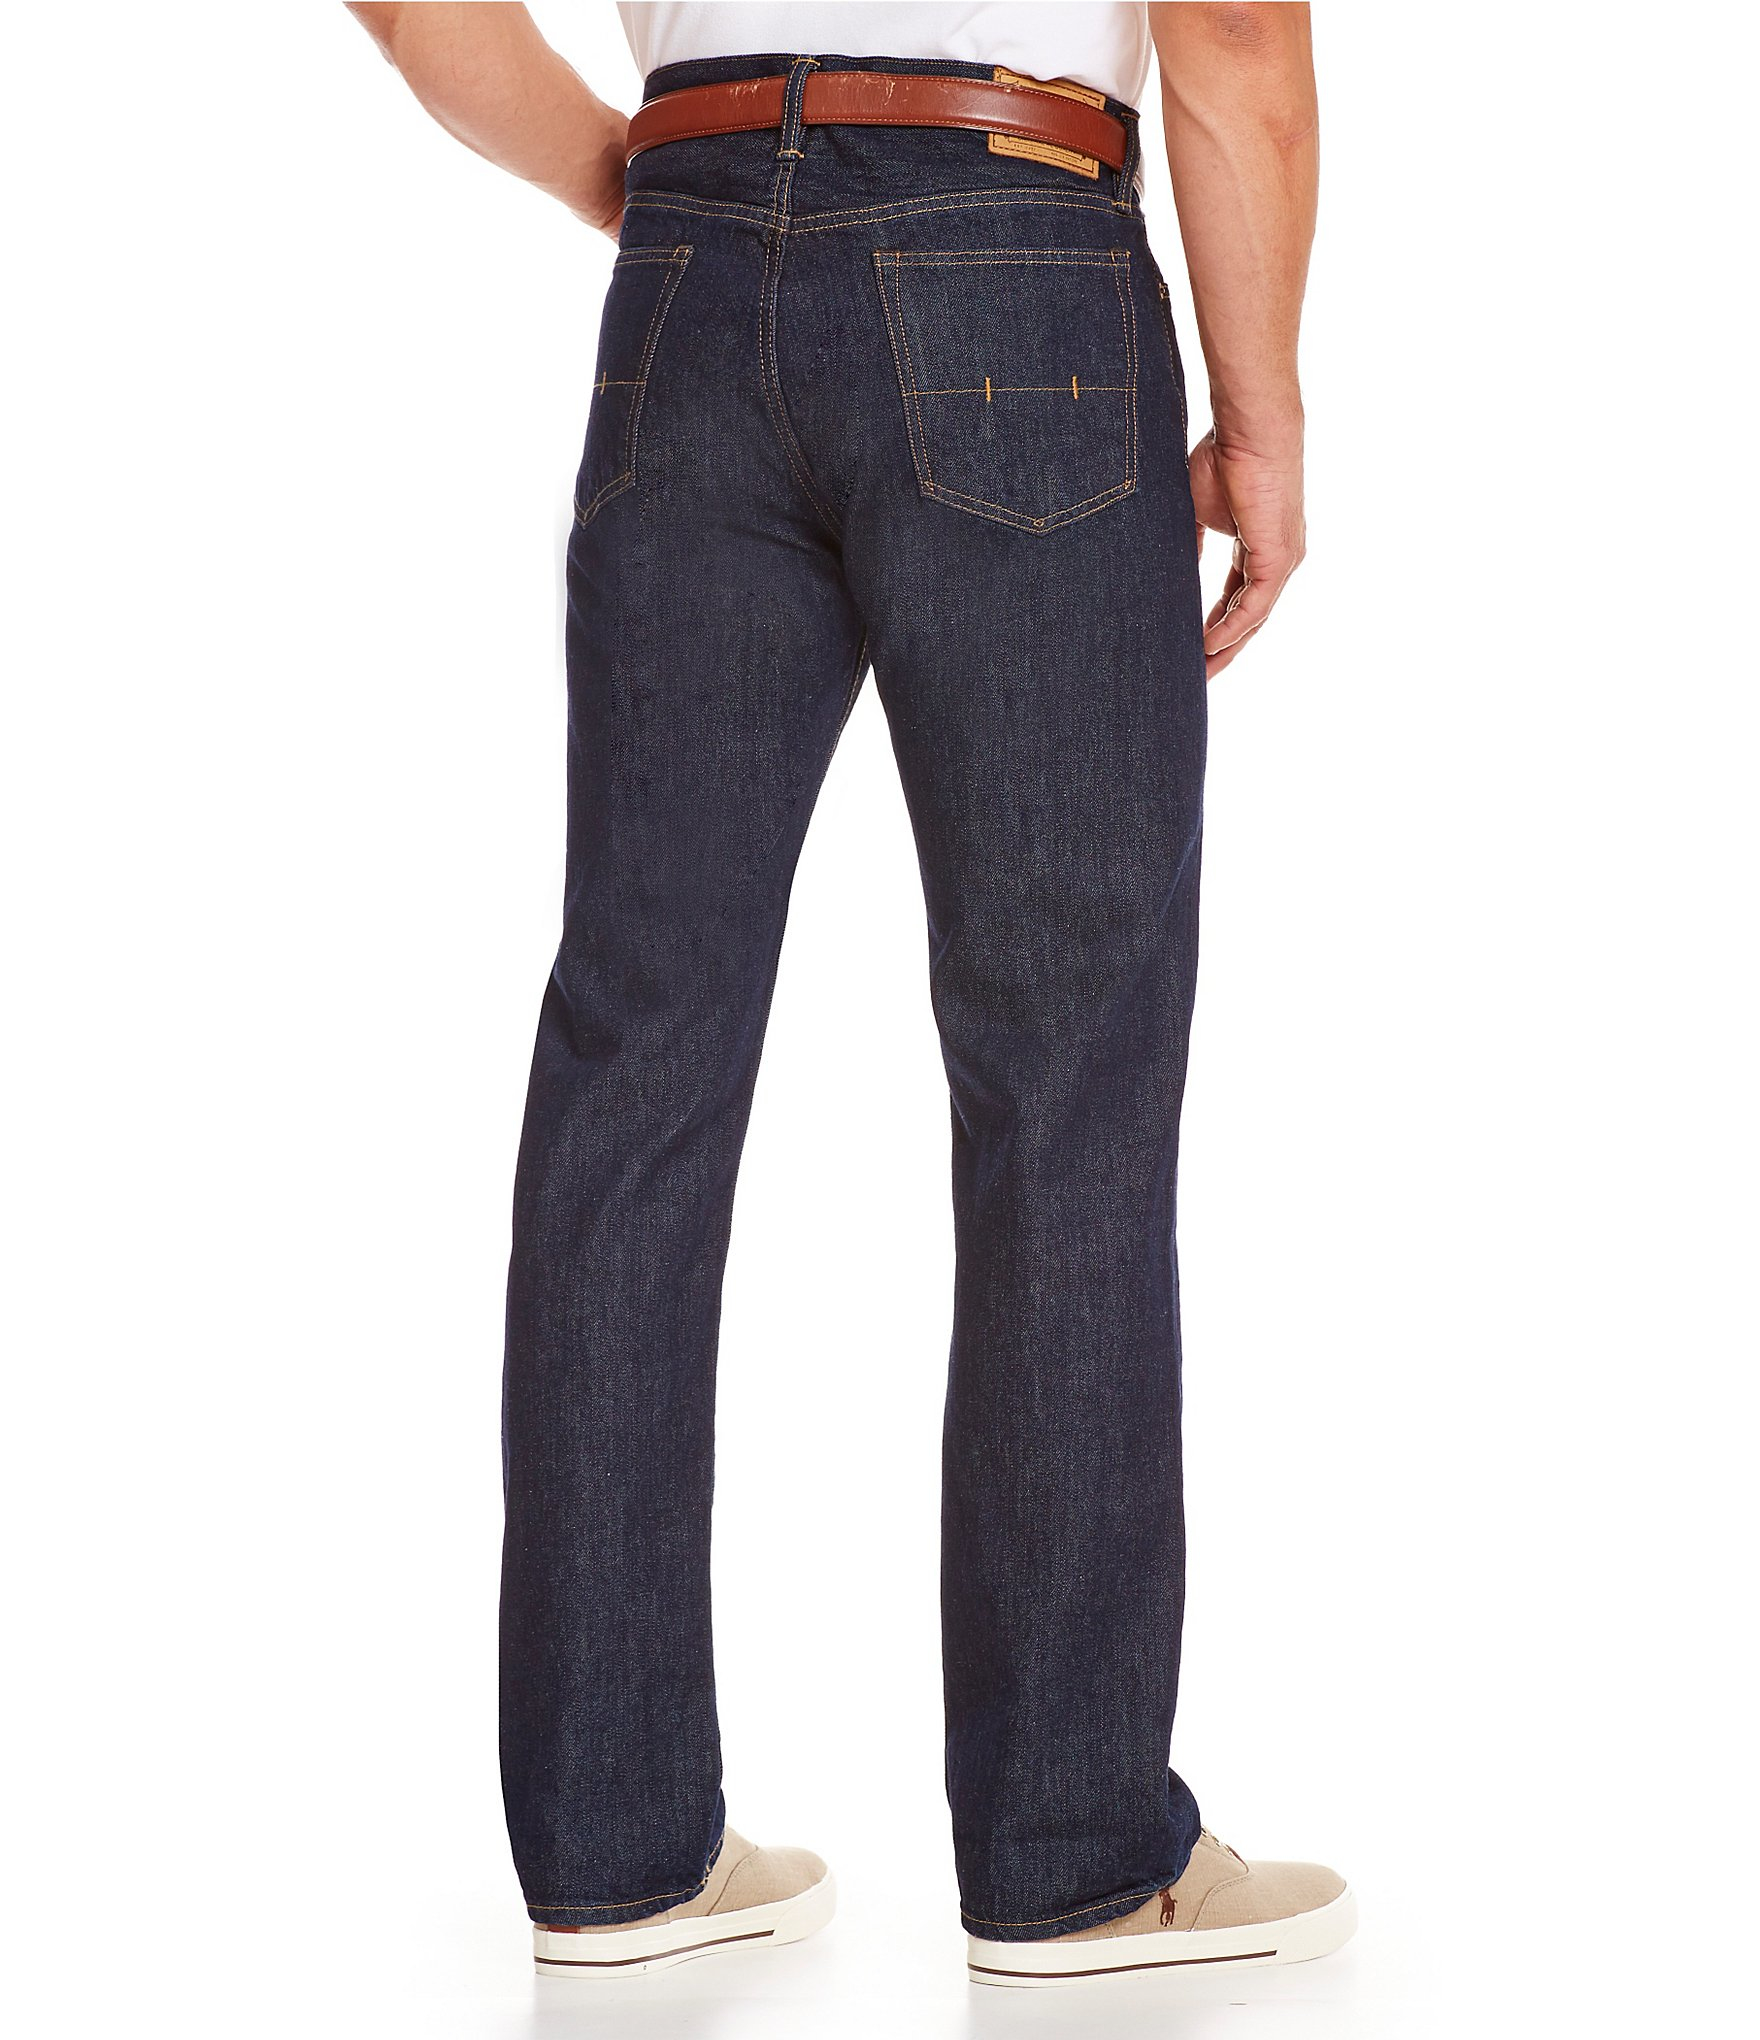 Lyst - Polo Ralph Lauren Thompson Relaxed-fit Jeans in Blue for Men